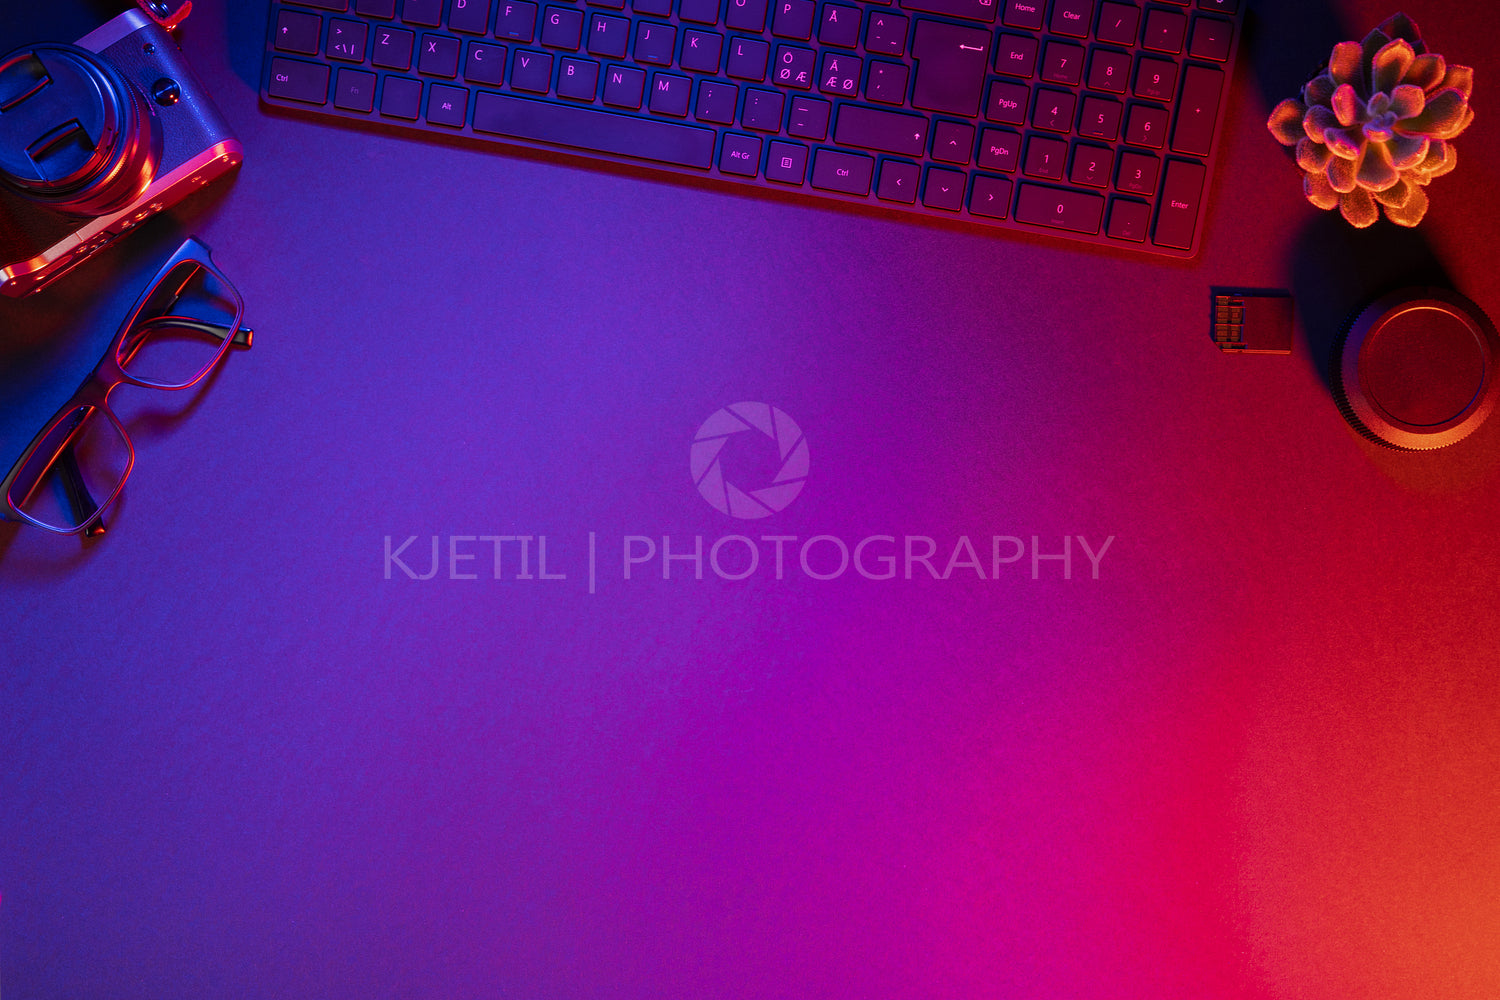 Overhead view of computer keyboard with camera on illuminated table